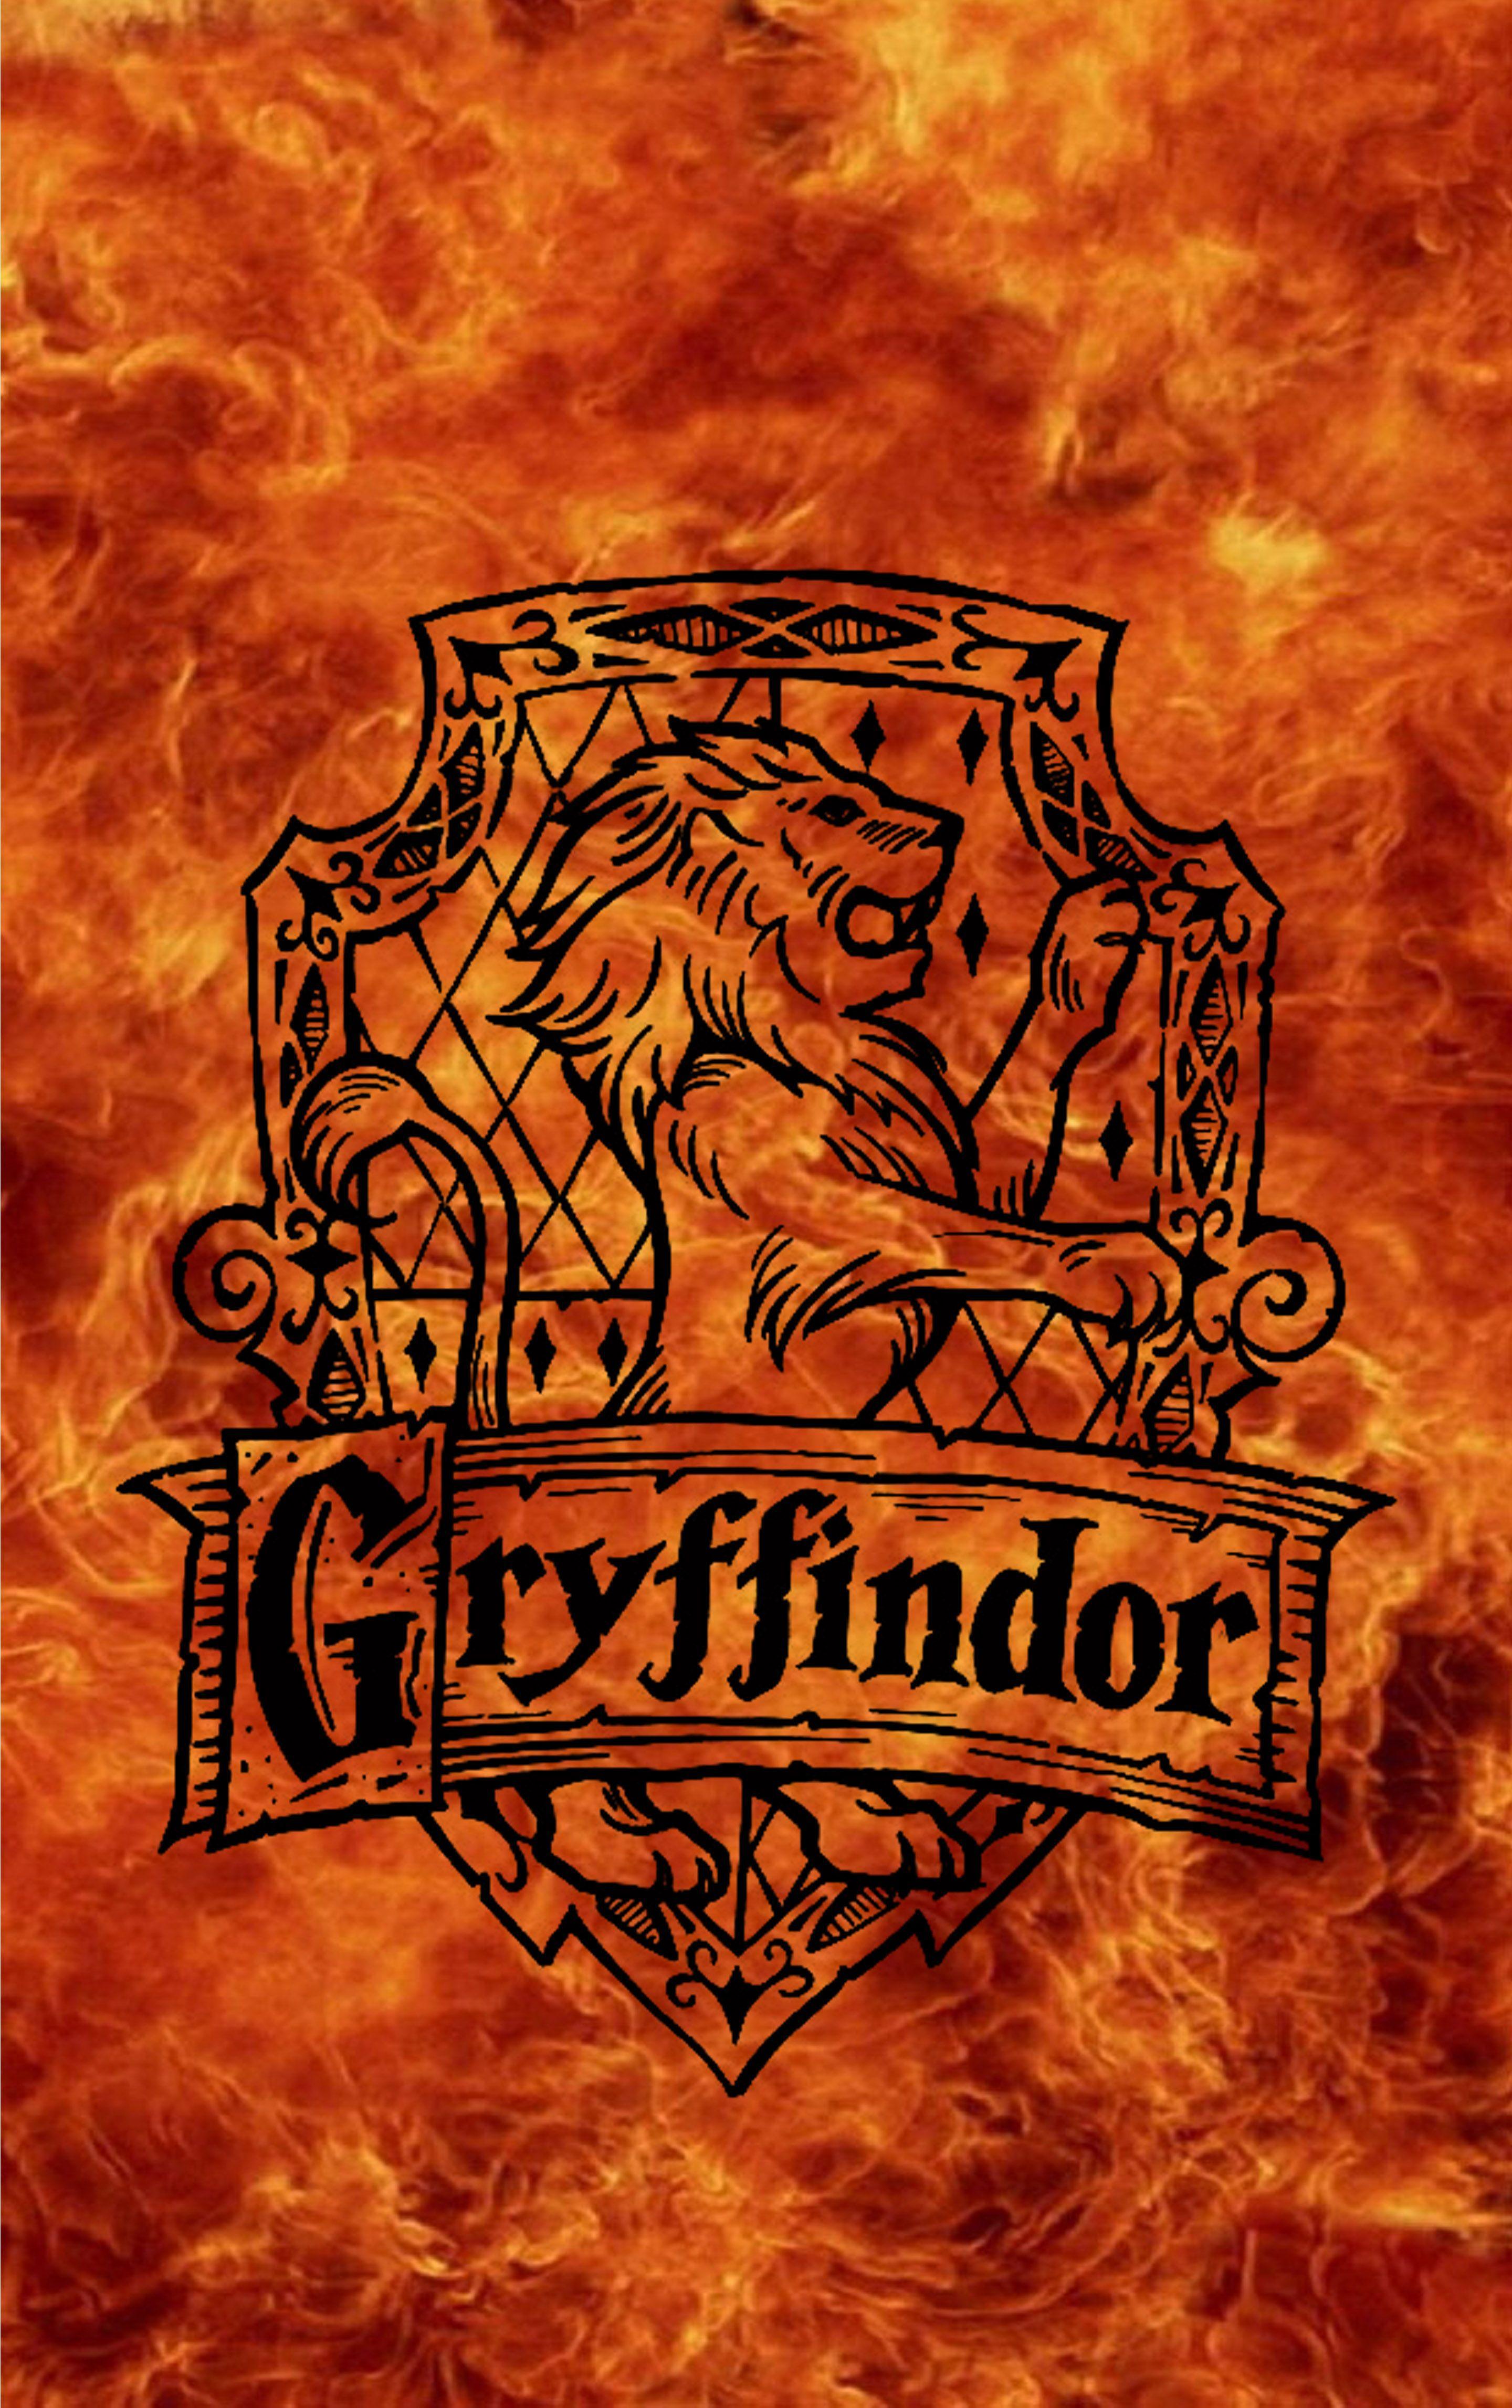 Gryffindor wallpapers for each based on the wizarding world logos and had  no idea how to post them together so i made 4 posts sorry  rharrypotter